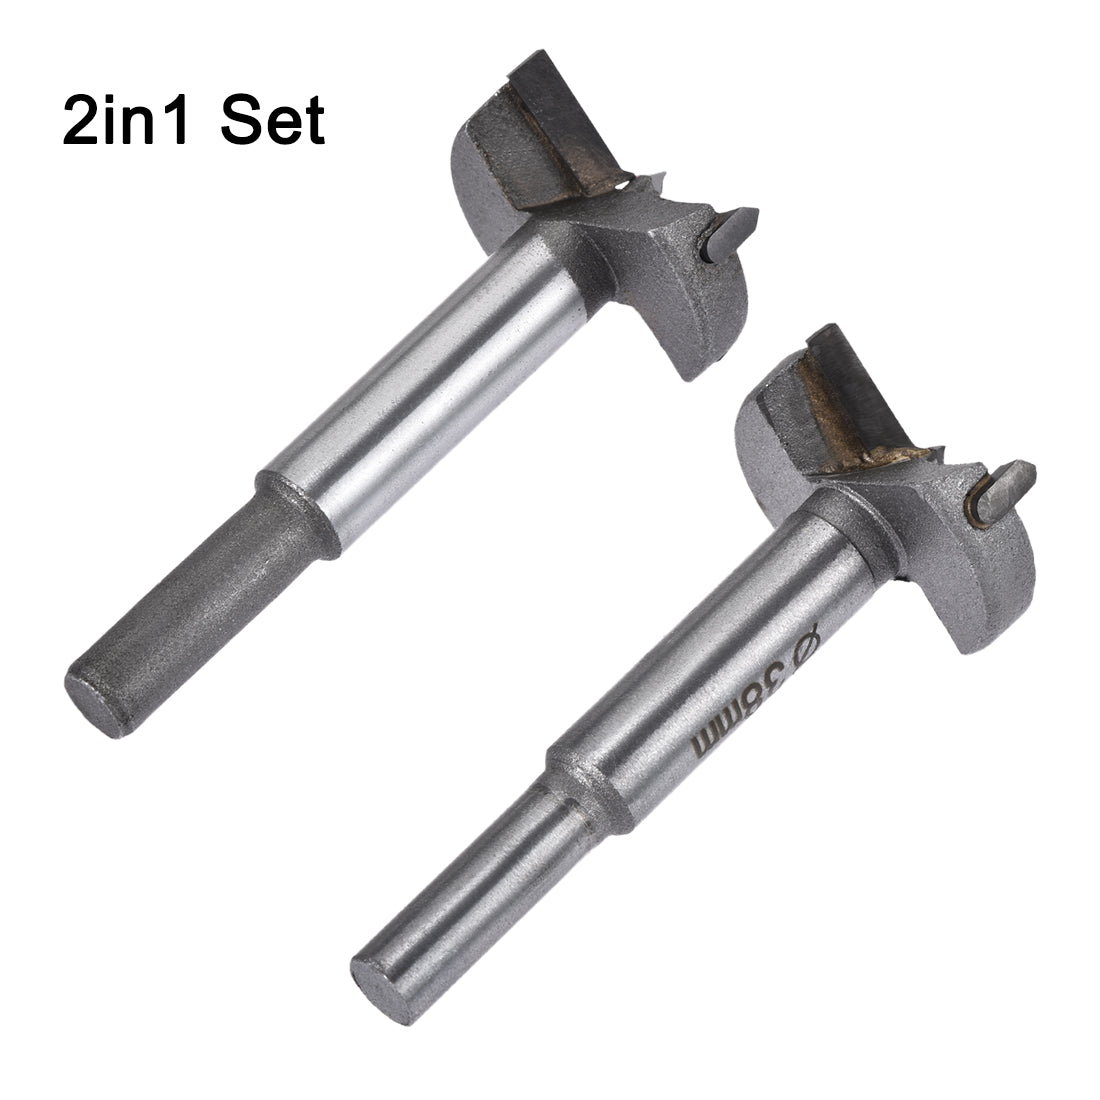 Uxcell Uxcell Forstner Wood Boring Drill Bits 32mm 35mm Dia. Hole Saw Carbide Alloy Steel Tip Round Shank Cutting for Hinge Plywood Wood Tool 2in1 Set